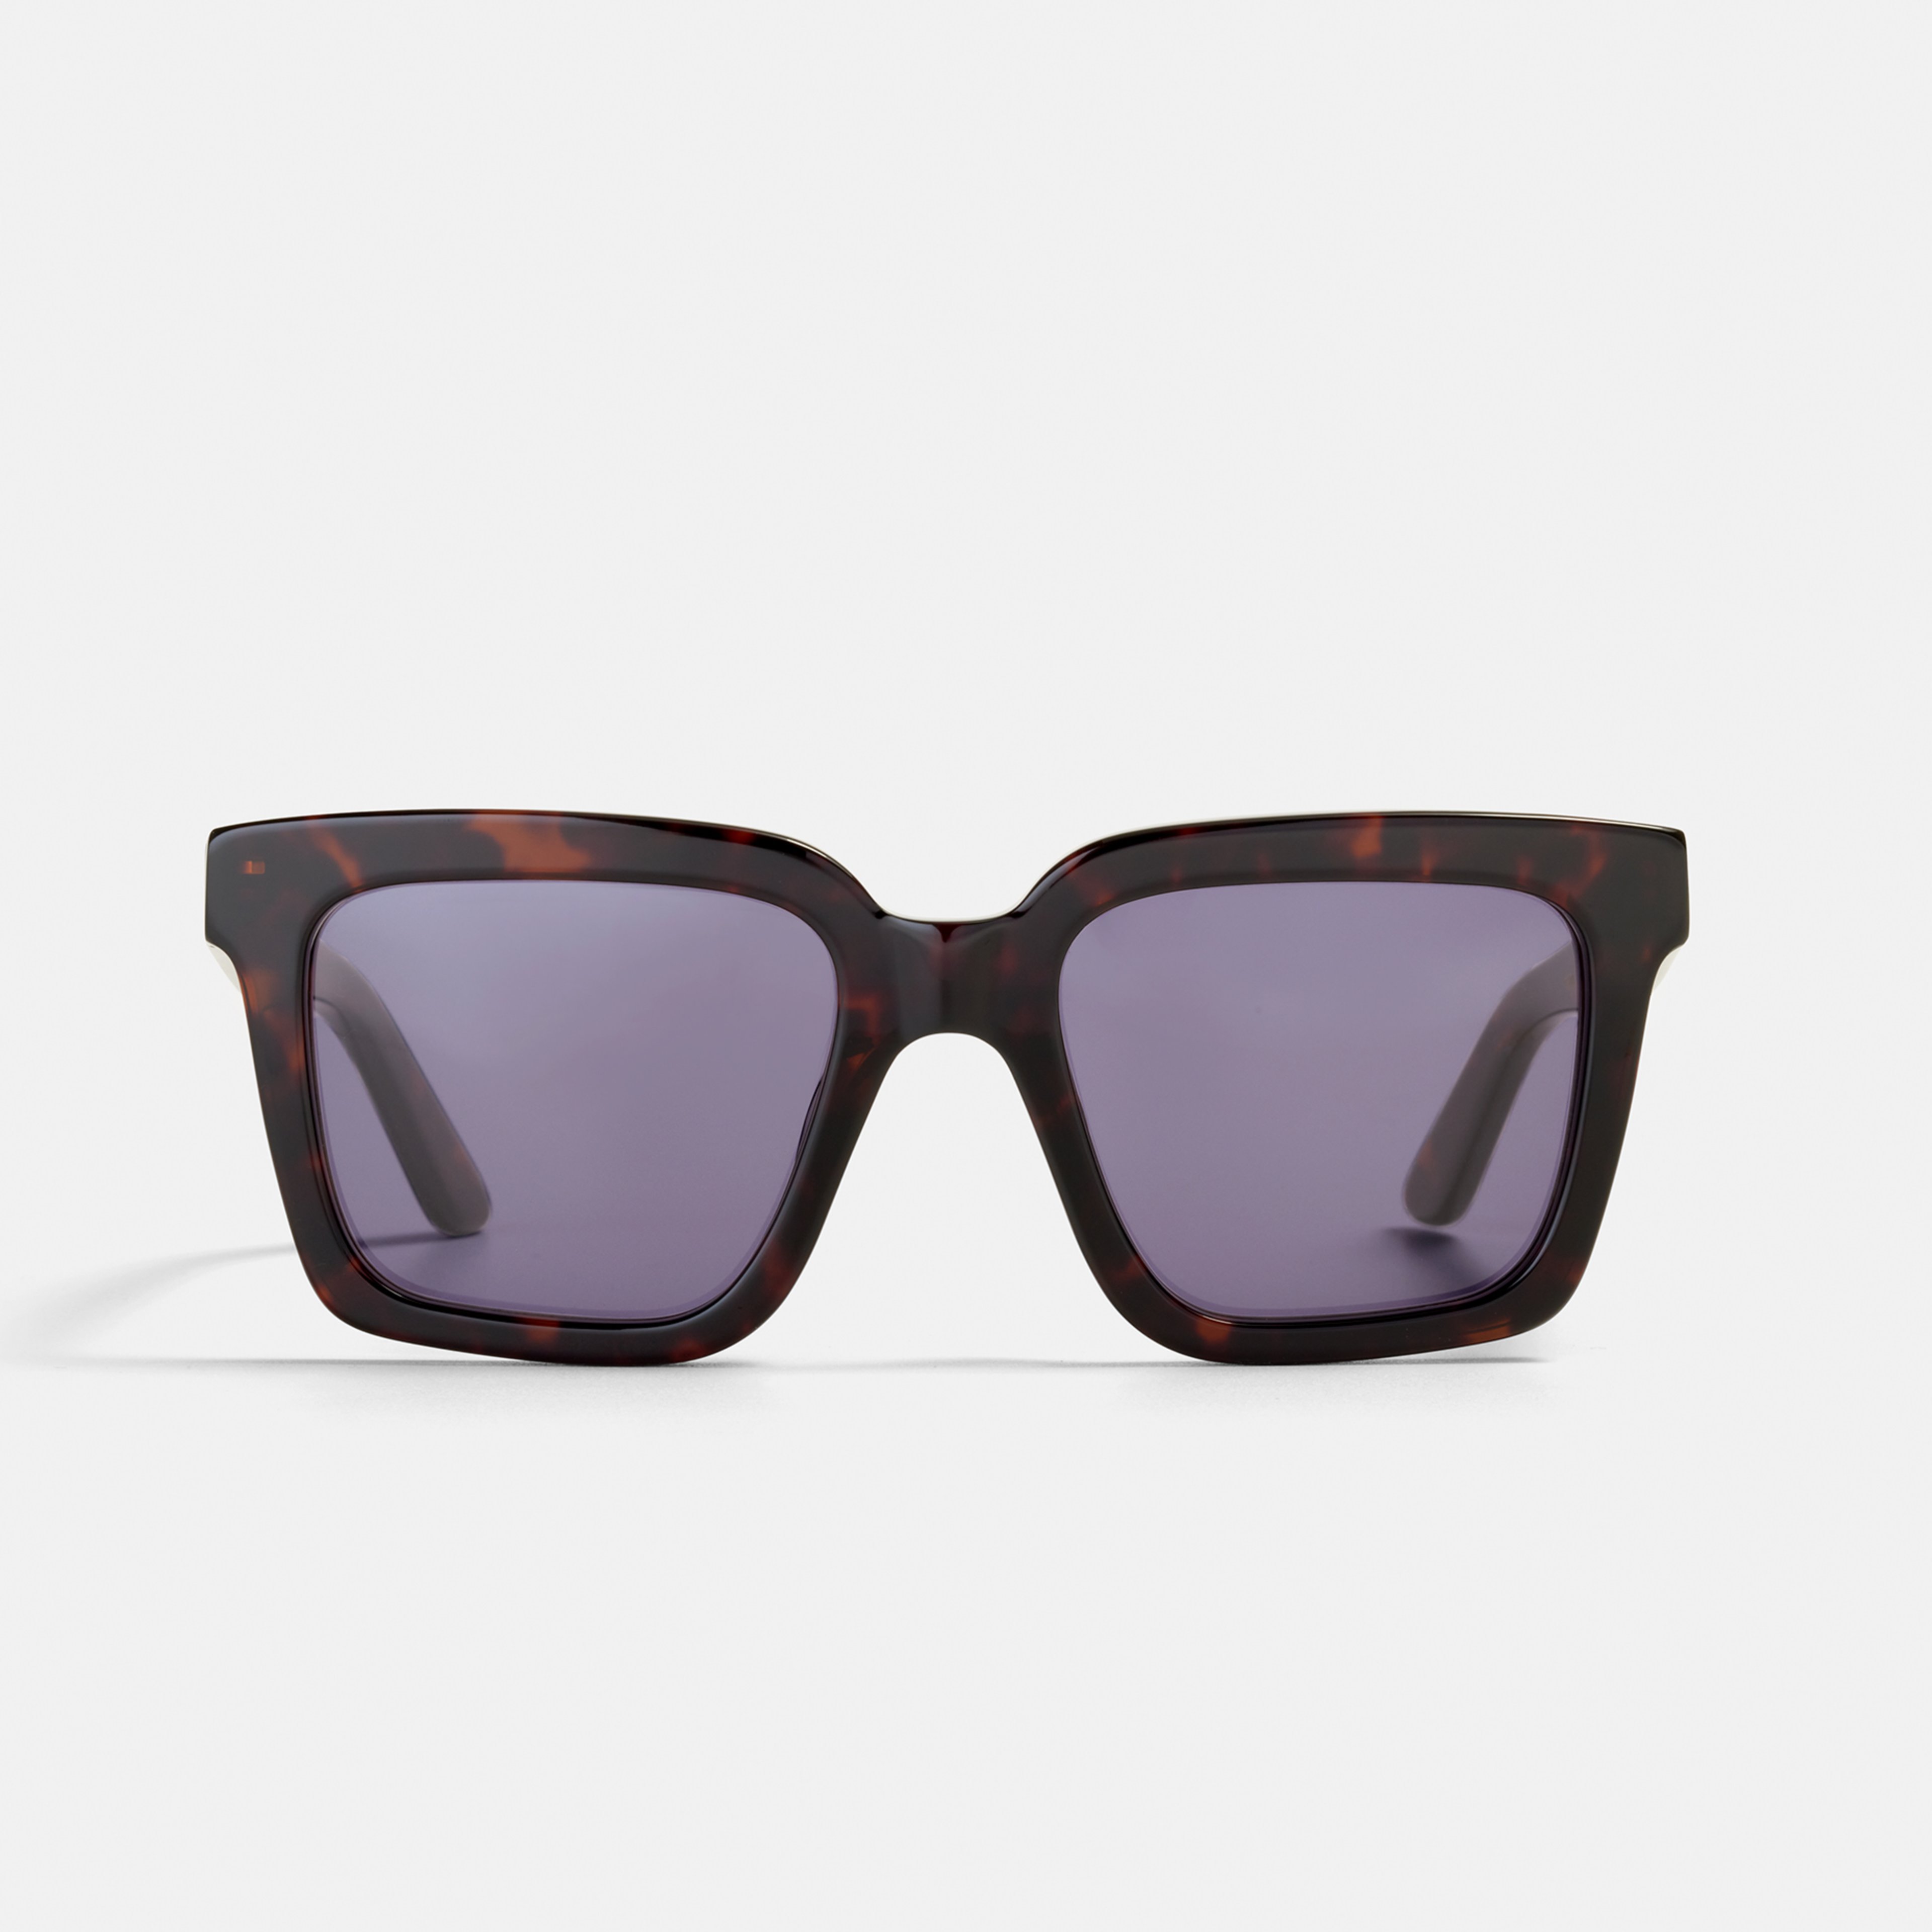 Ace & Tate Solaires |  Acétate in tortoise